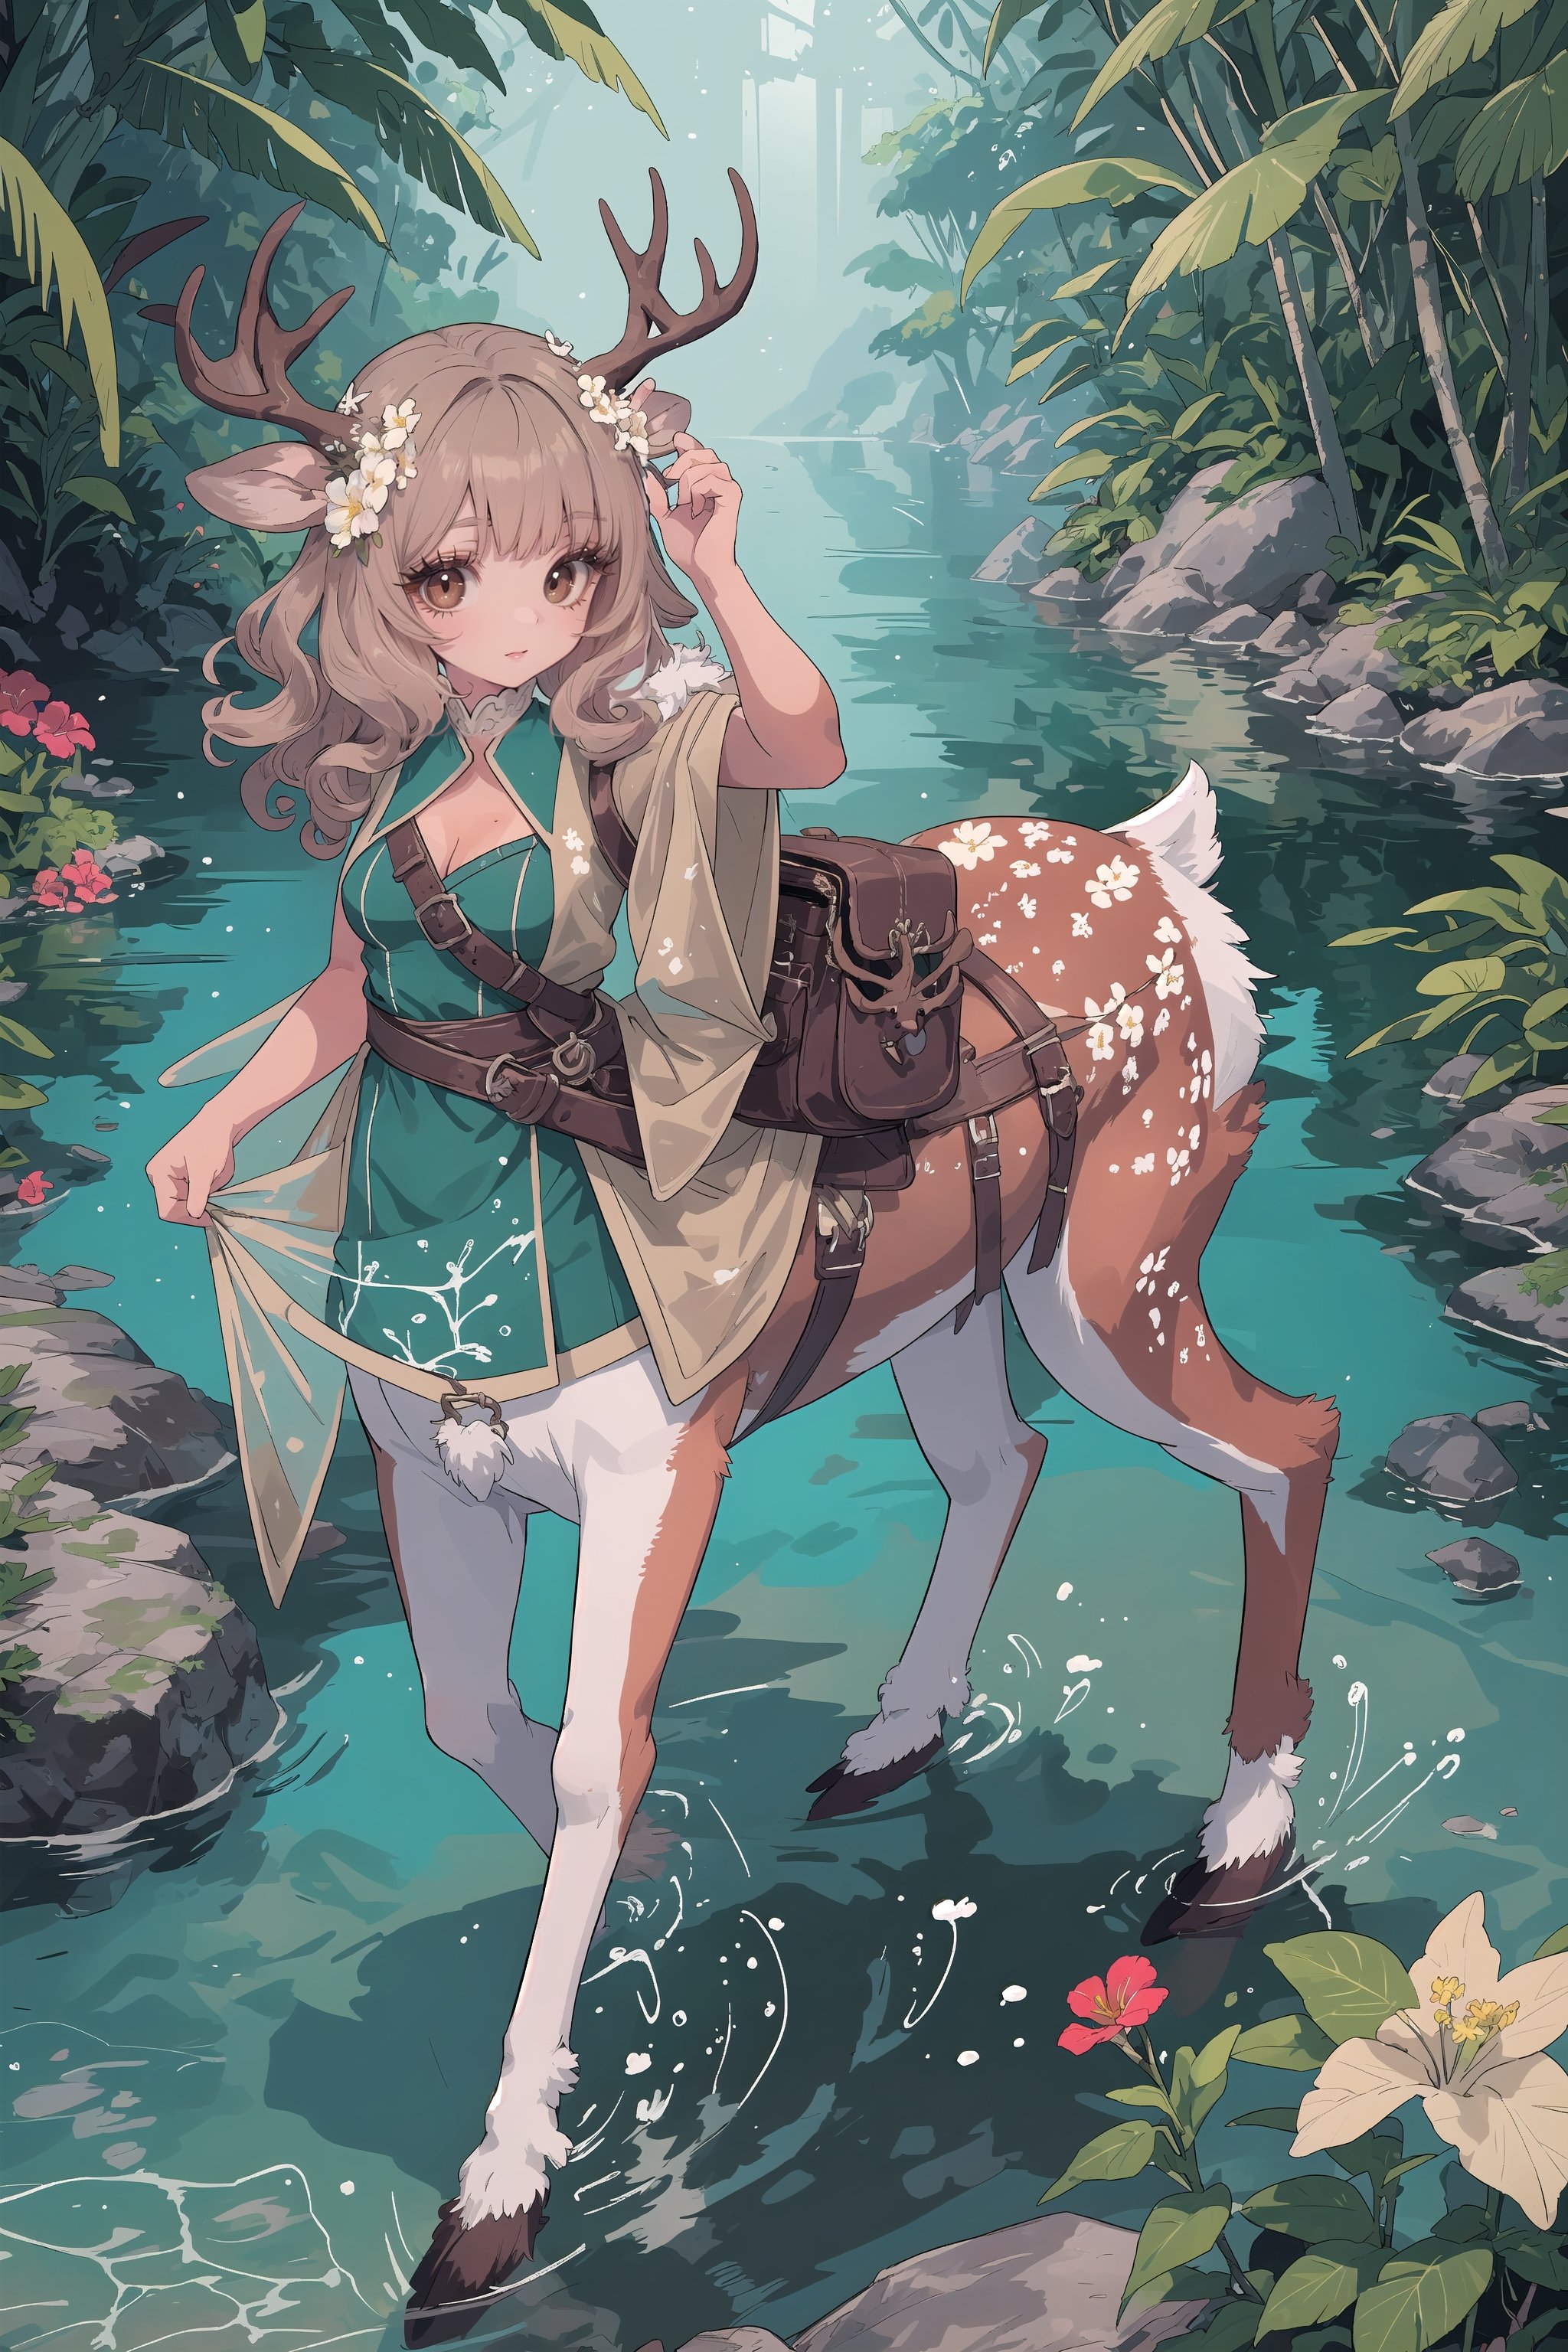 (adult female, single character, human upper half, Centaur with deer body lower half, hooves, centaur, light tan fur with white spots, centaur with deer body with light tan deer fur with white spots on rump, deer ears, light brown fur body, thin, petite, medium breasts, small deer tail, deer legs), (very long dark brown wavey curly hair on head, very detailed hair, small flowering vines woven in hair on head, flowers in hair on head, flowers woven in hair), pirate outfit,  excited, full of energy, full body view, attractive, angular face, adventurer, character focus, very detailed, high detail, masterpiece, high quality, saddle bags, extremely high detailed, complex backgroud, vibrant tropical island, detailed tropical scenery, very detailed beach with clear water, very detailed clear water with fish swimming near legs, lower legs under water, tropical flowers growing everywhere, very detailed fur, petite lower body